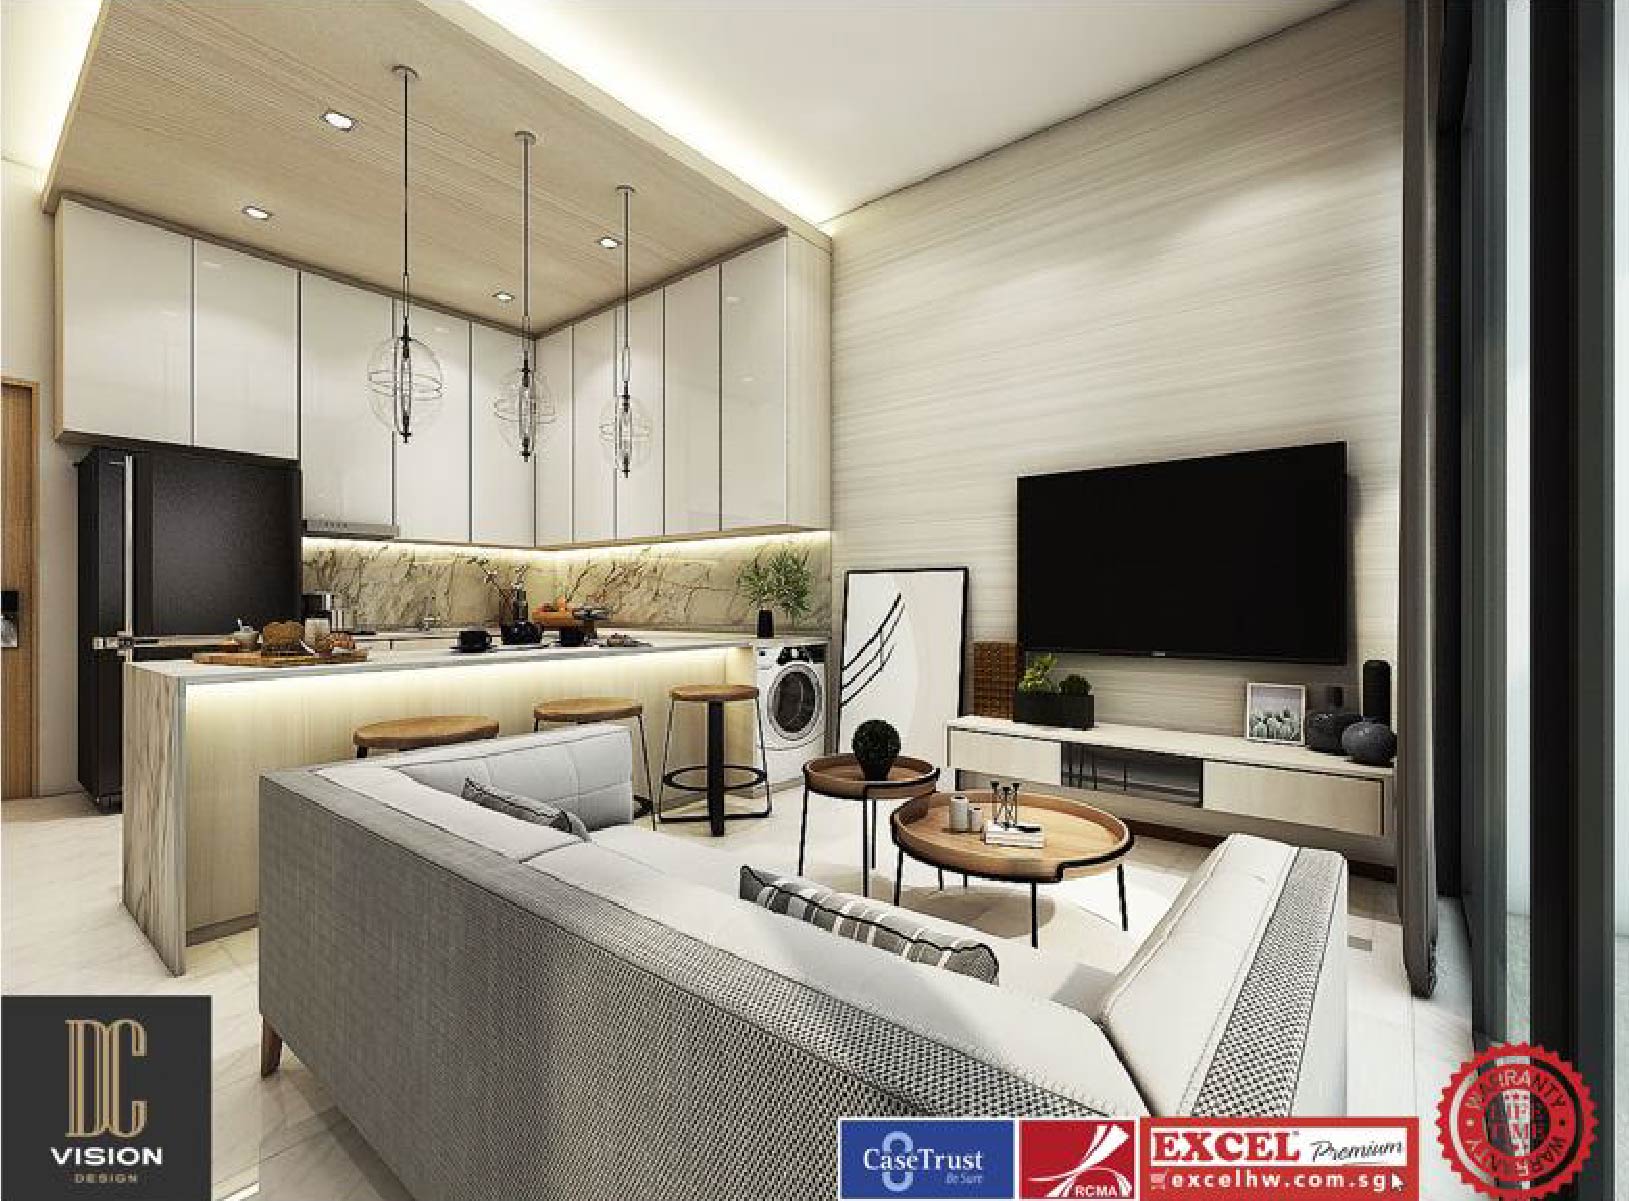 Woodlands Drive - 1076sqft by DC Vision Design Pte Ltd. Unit is HDB and follows a  style.